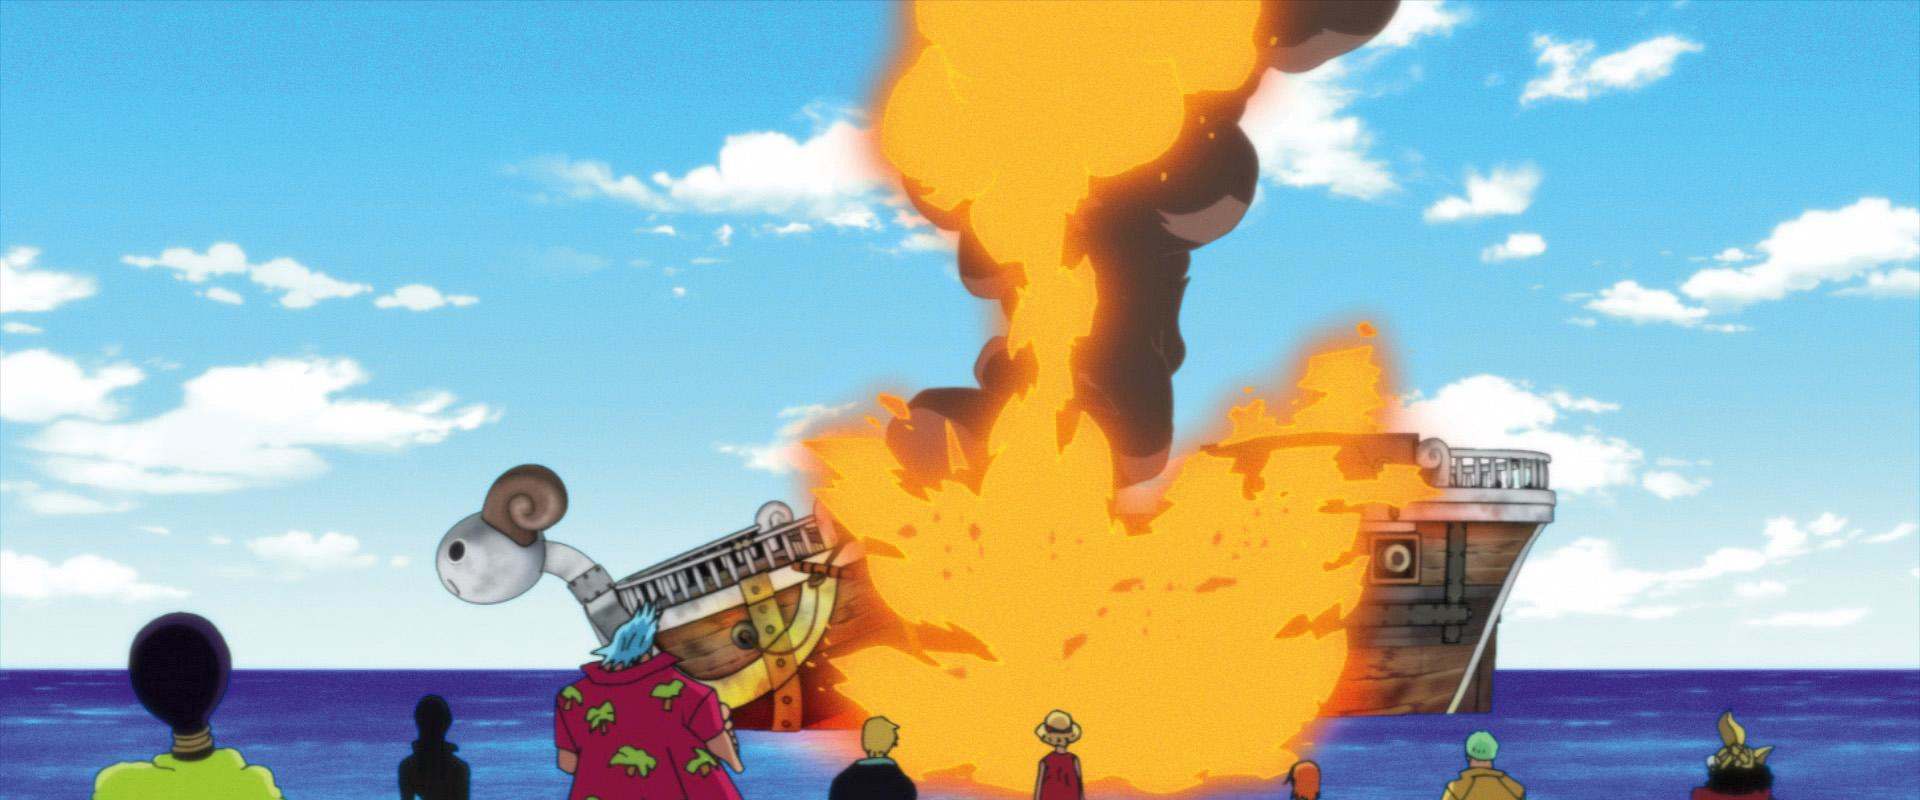 One Piece Episode of Merry: The Tale of One More Friend background 1